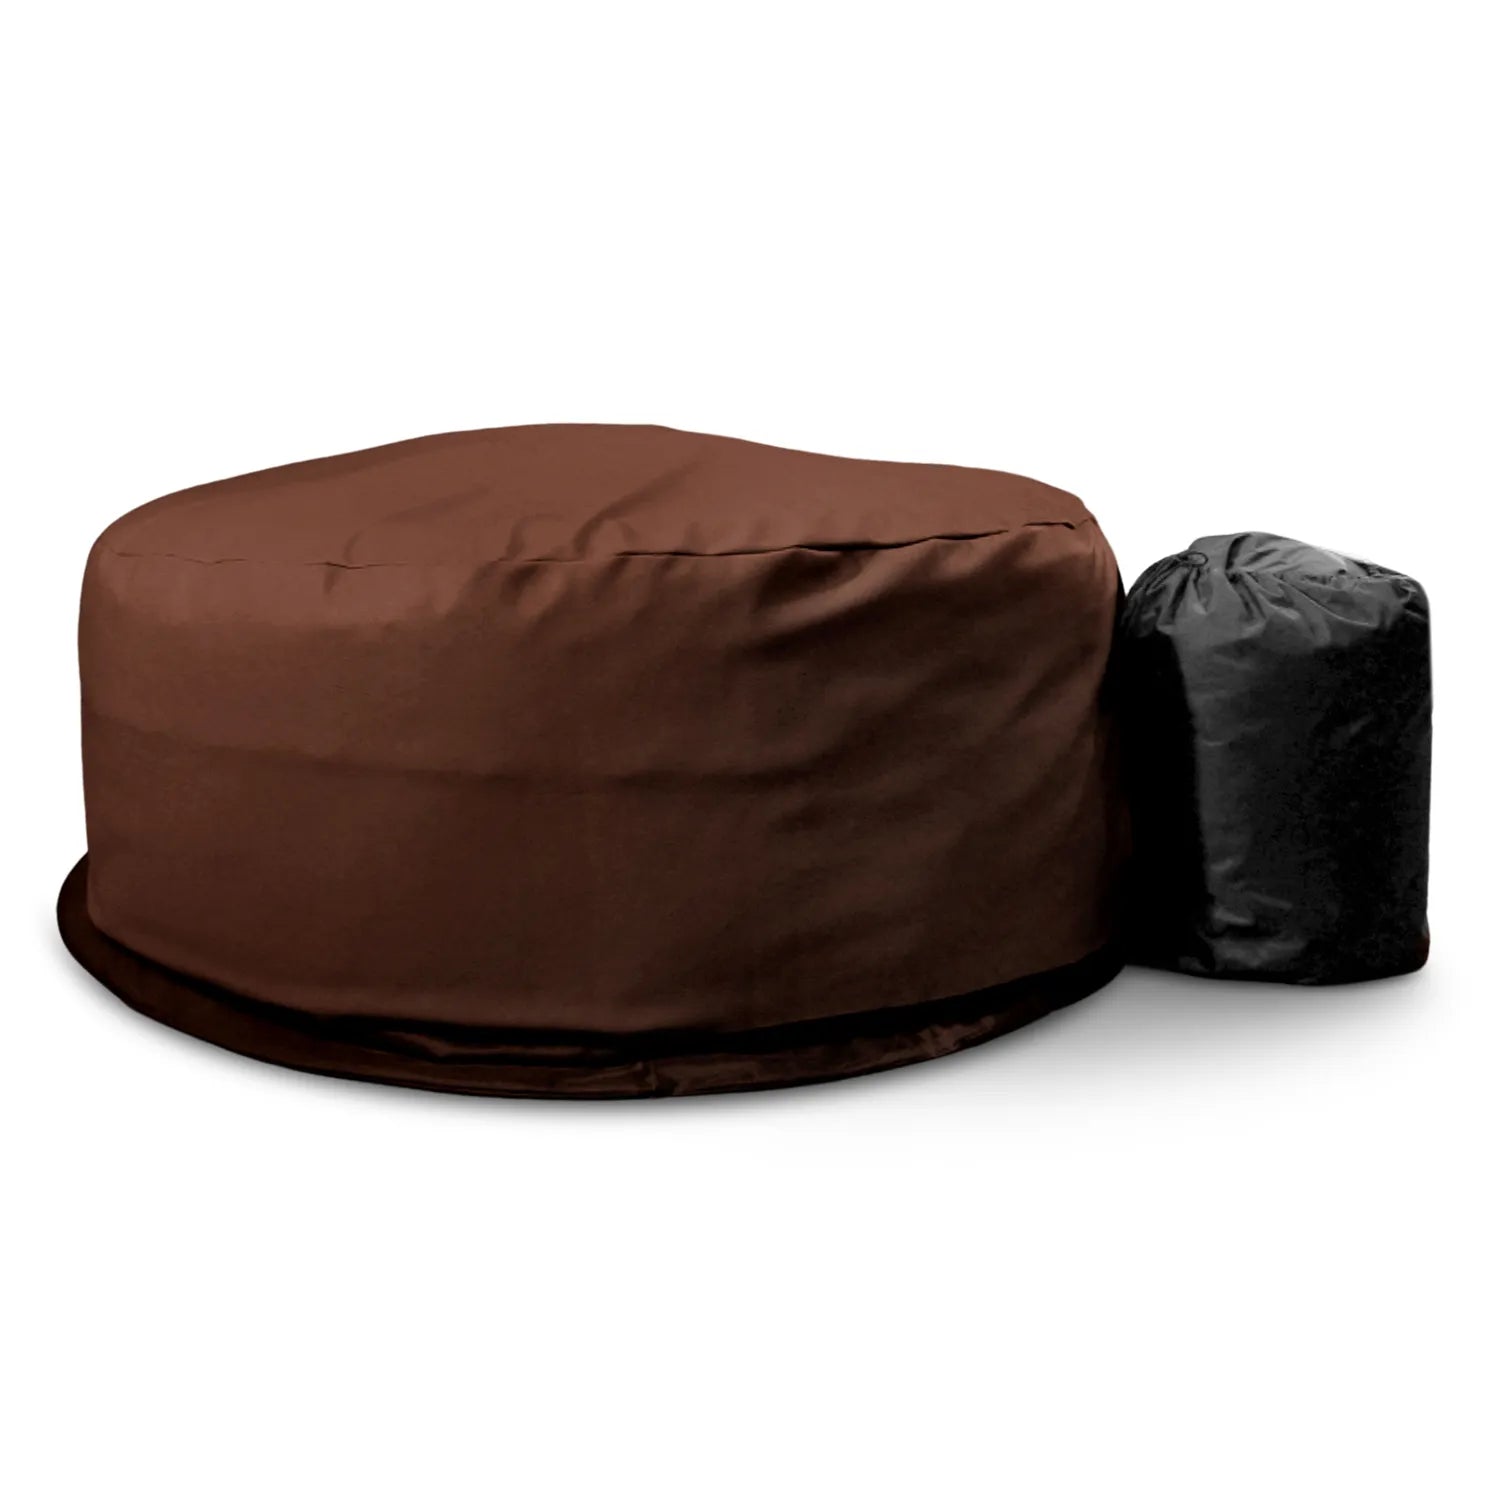 Deluxe Leather Hot Tub Cover